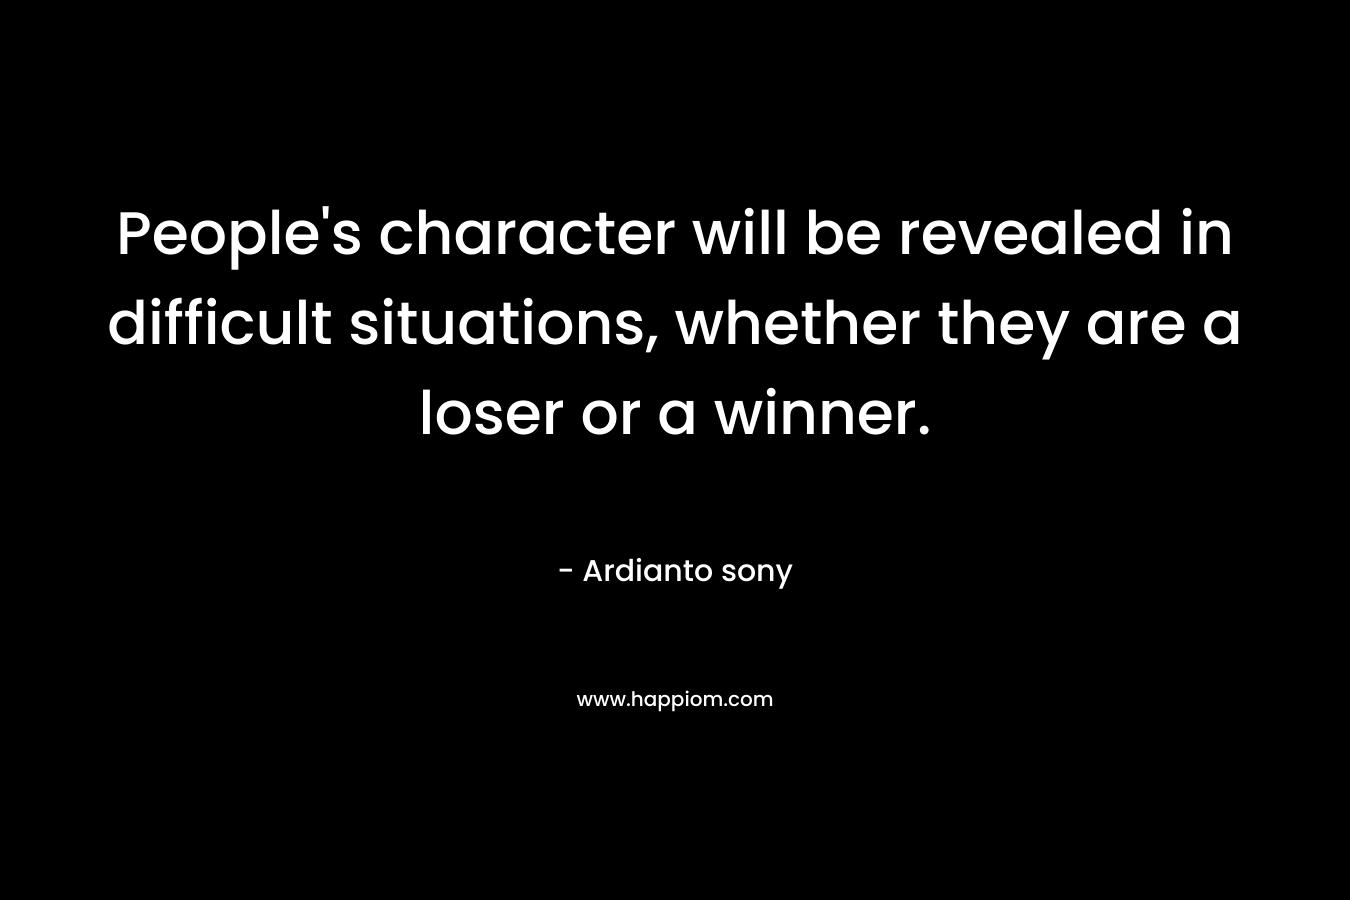 People's character will be revealed in difficult situations, whether they are a loser or a winner.